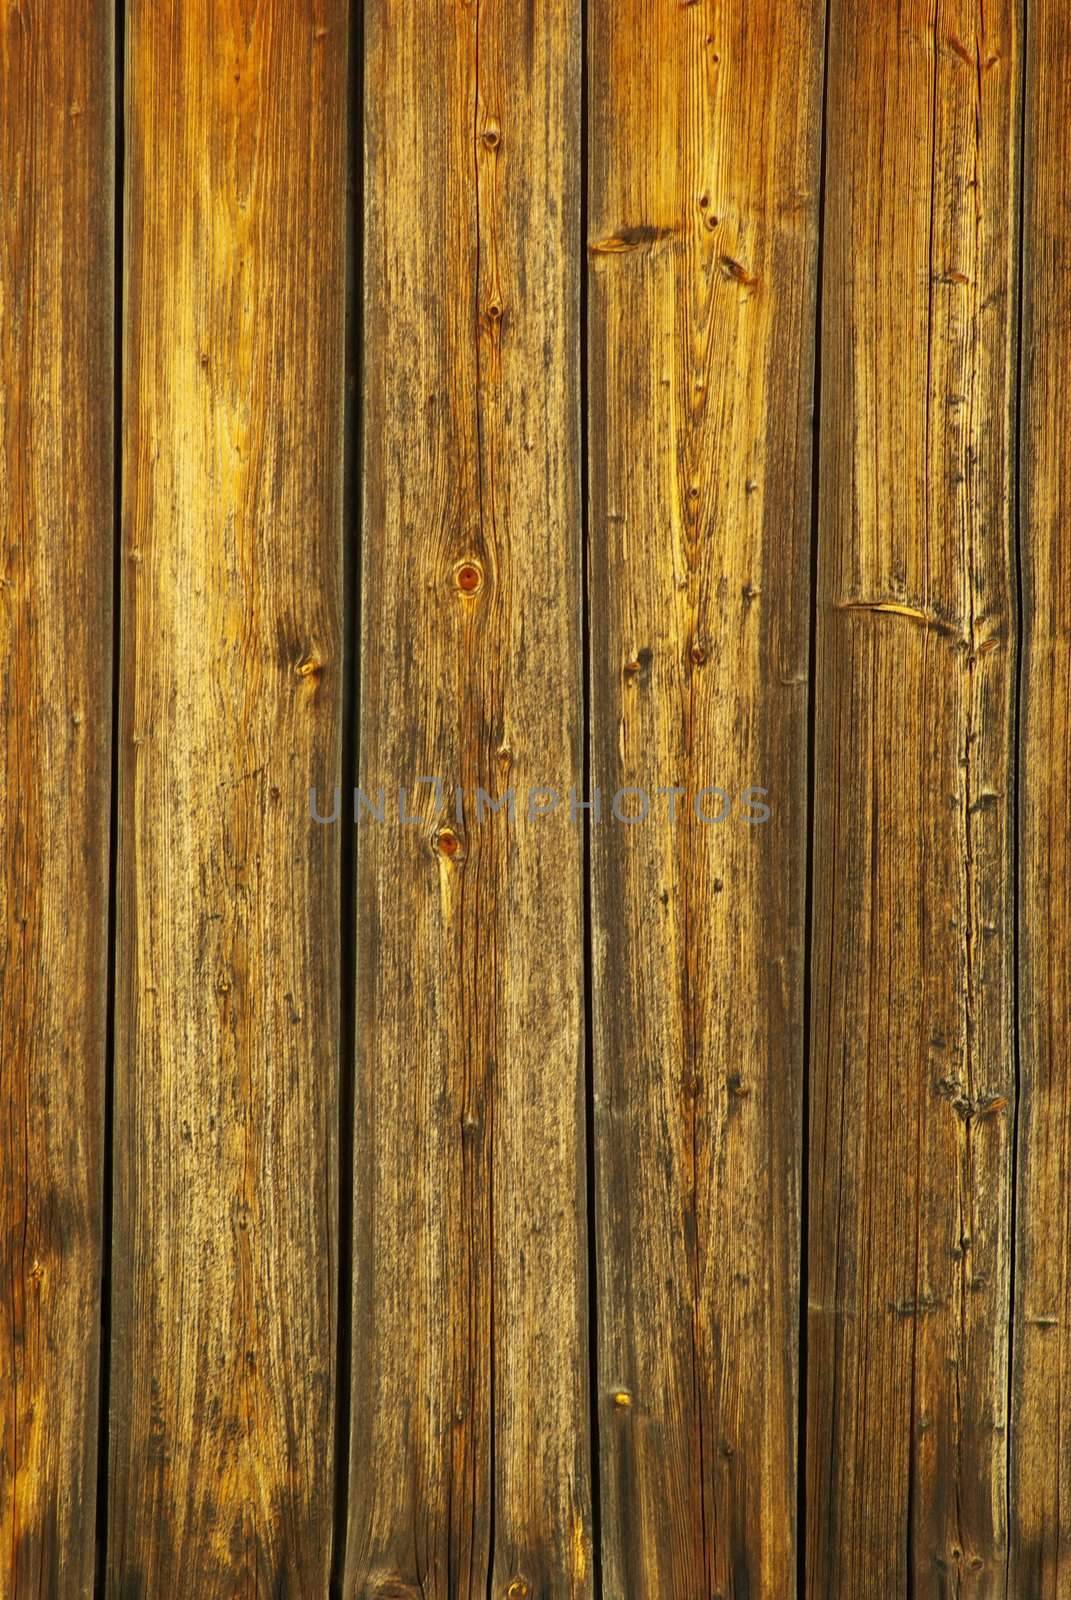  brown wood texture with a natural patterns